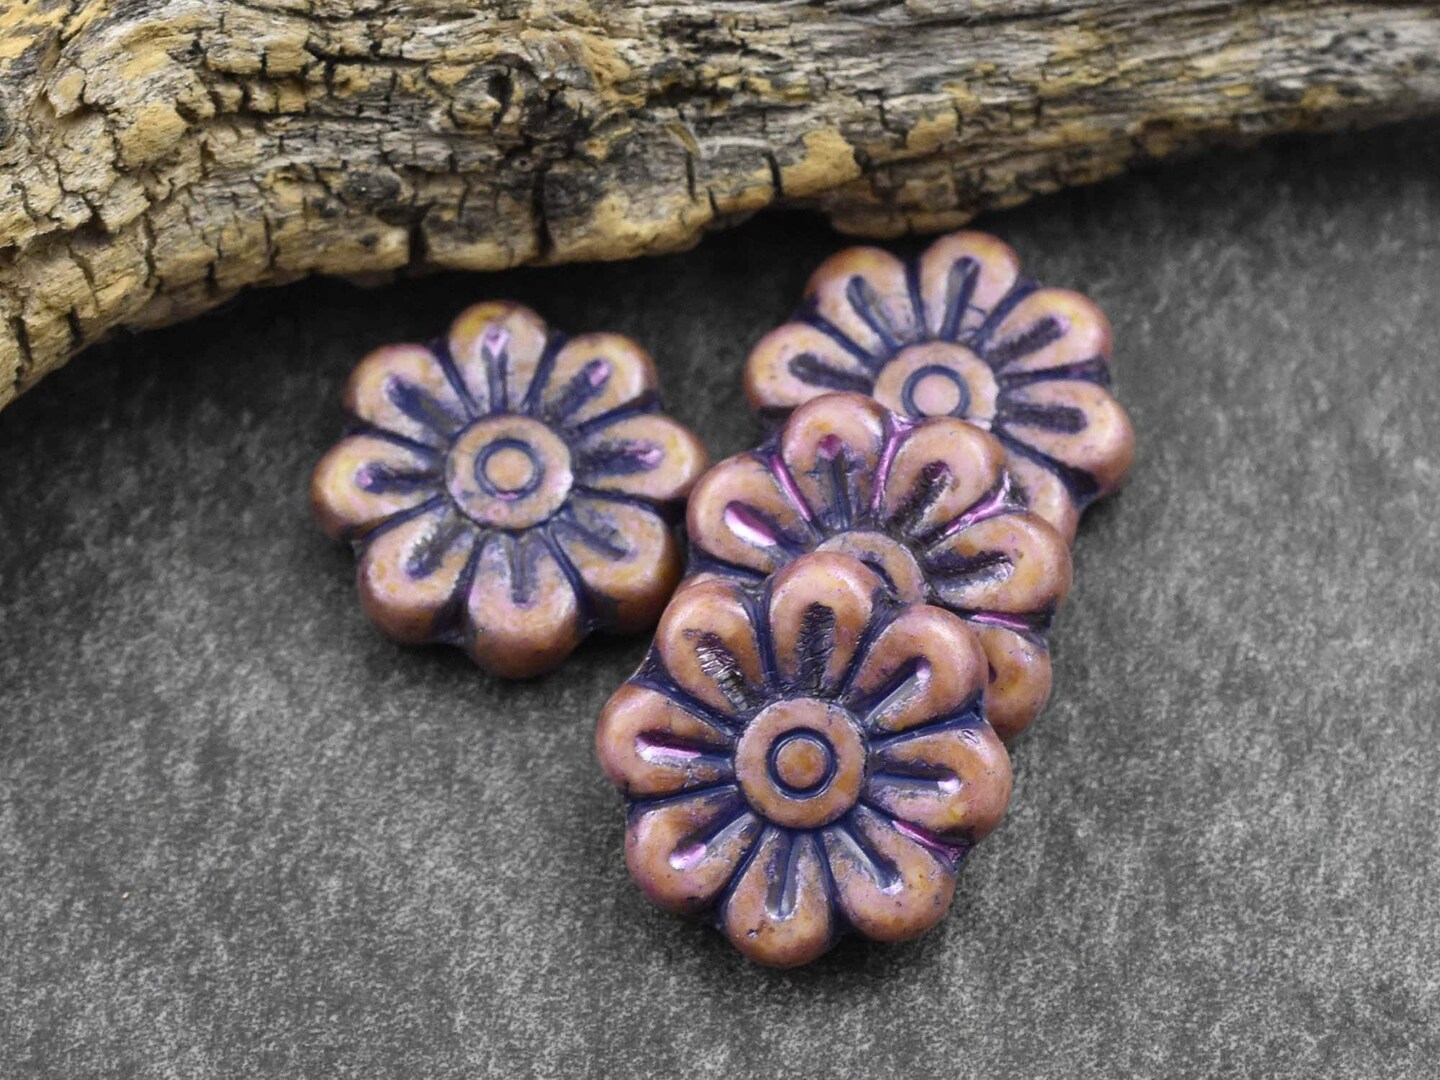 *6* 18mm Blue Washed Rose Pink Alabaster Daisy Flower Beads